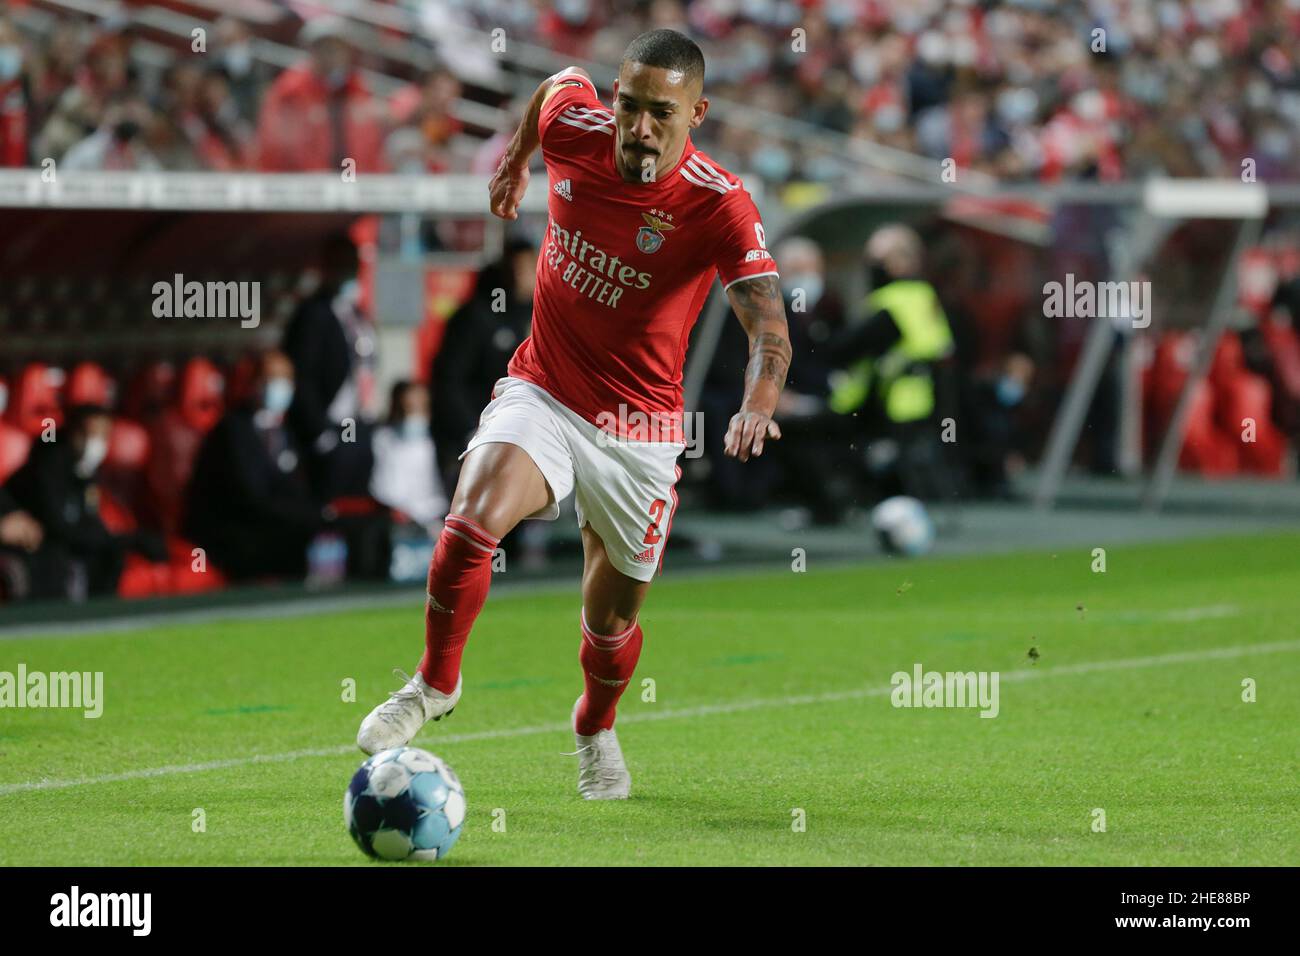 Lisboa, Portugal. 09th Jan, 2022. Gilberto defender of SL Benfica in action during the Liga Portugal Bwin match between SL Benfica vs FC Paços de Ferreira at Estádio da Luz on 09 January, 2022 in Lisbon, Portugal. Valter Gouveia/SPP Credit: SPP Sport Press Photo. /Alamy Live News Stock Photo